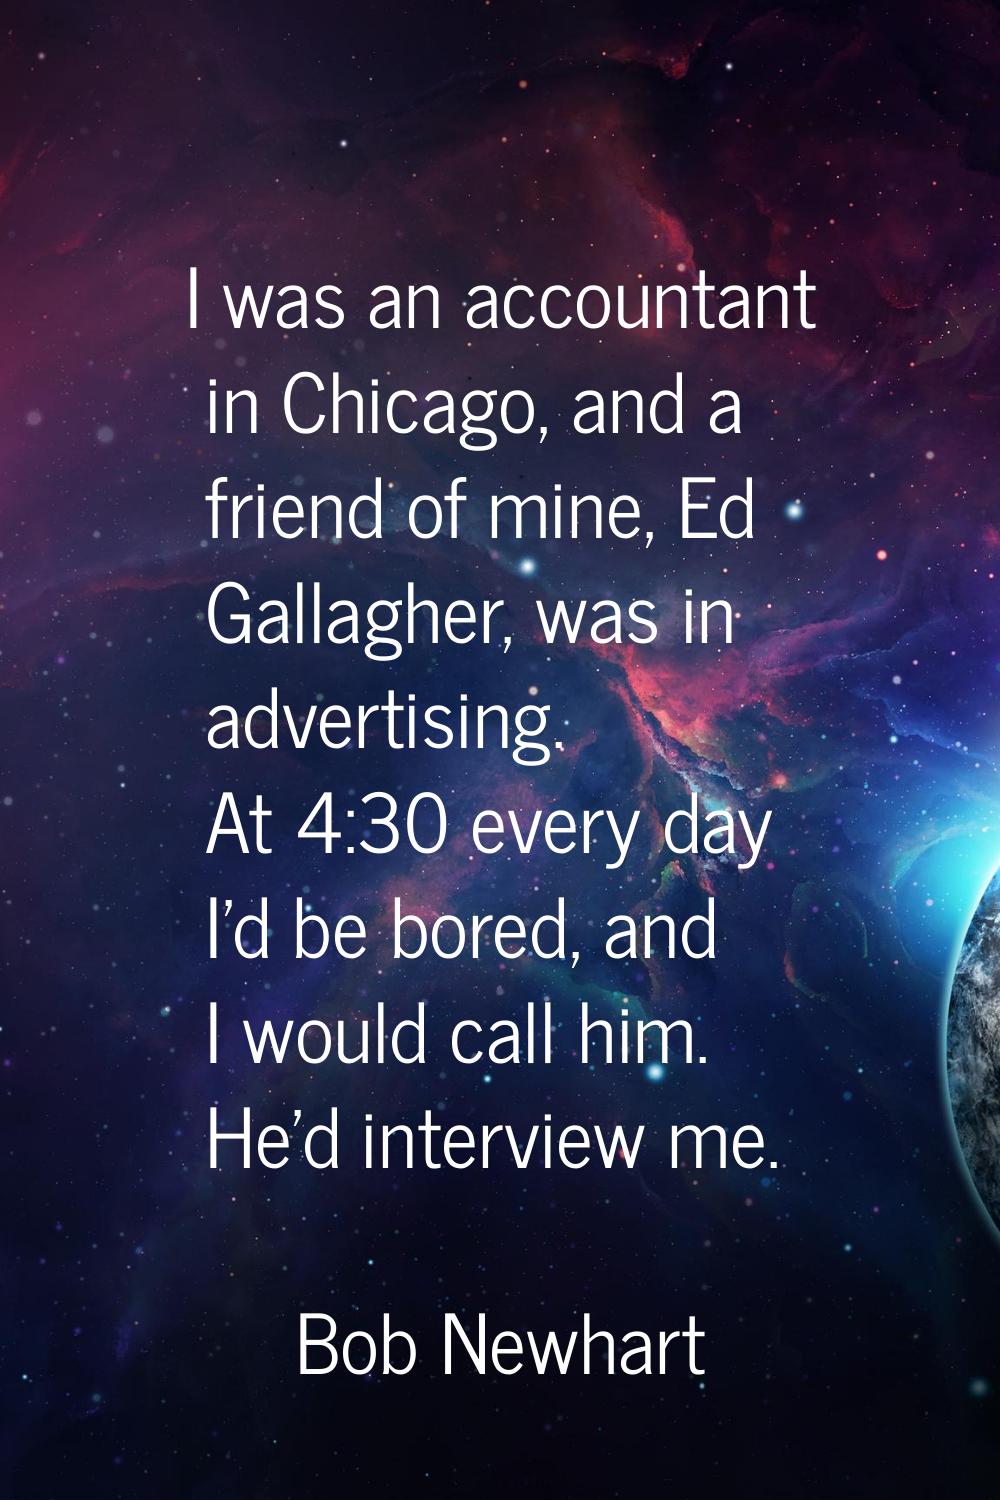 I was an accountant in Chicago, and a friend of mine, Ed Gallagher, was in advertising. At 4:30 eve